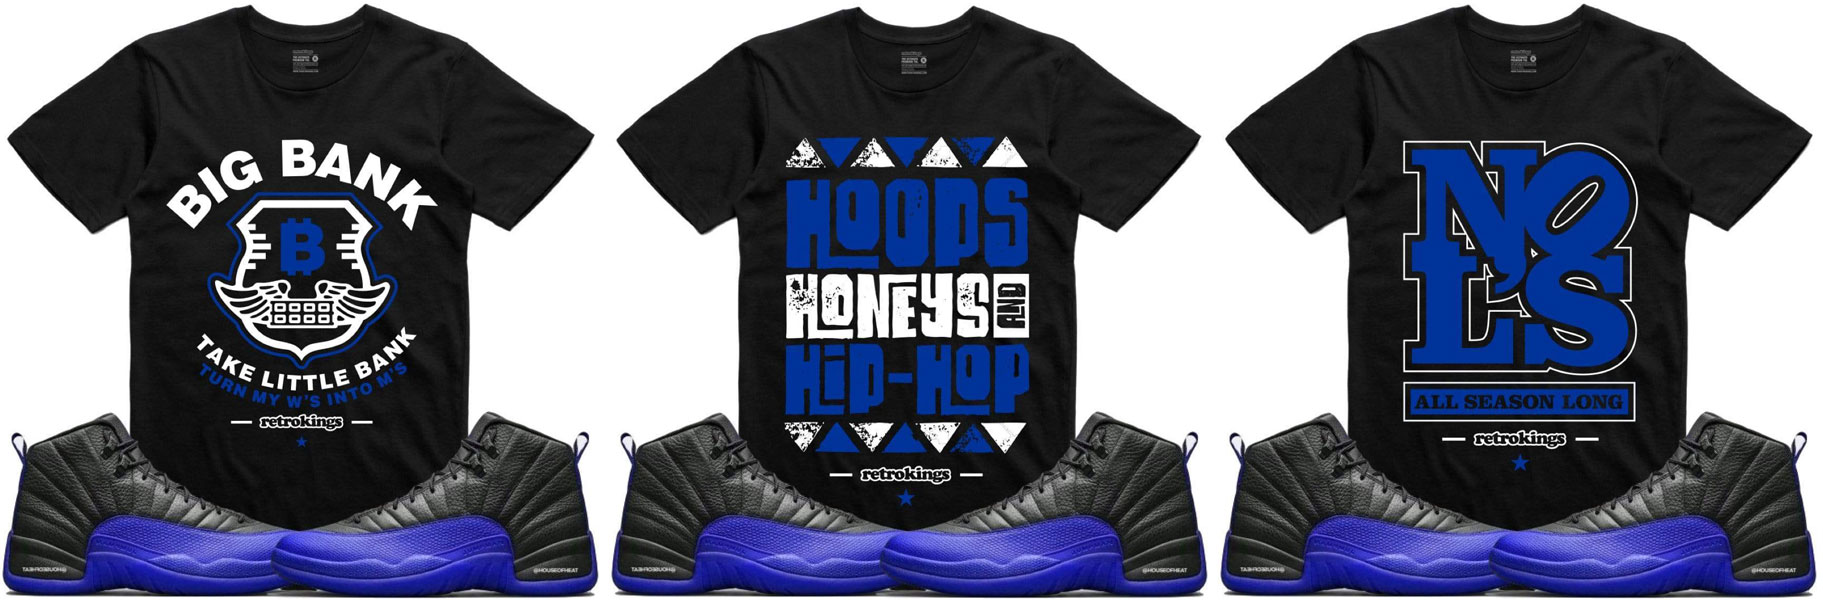 blue and black 12s shirt